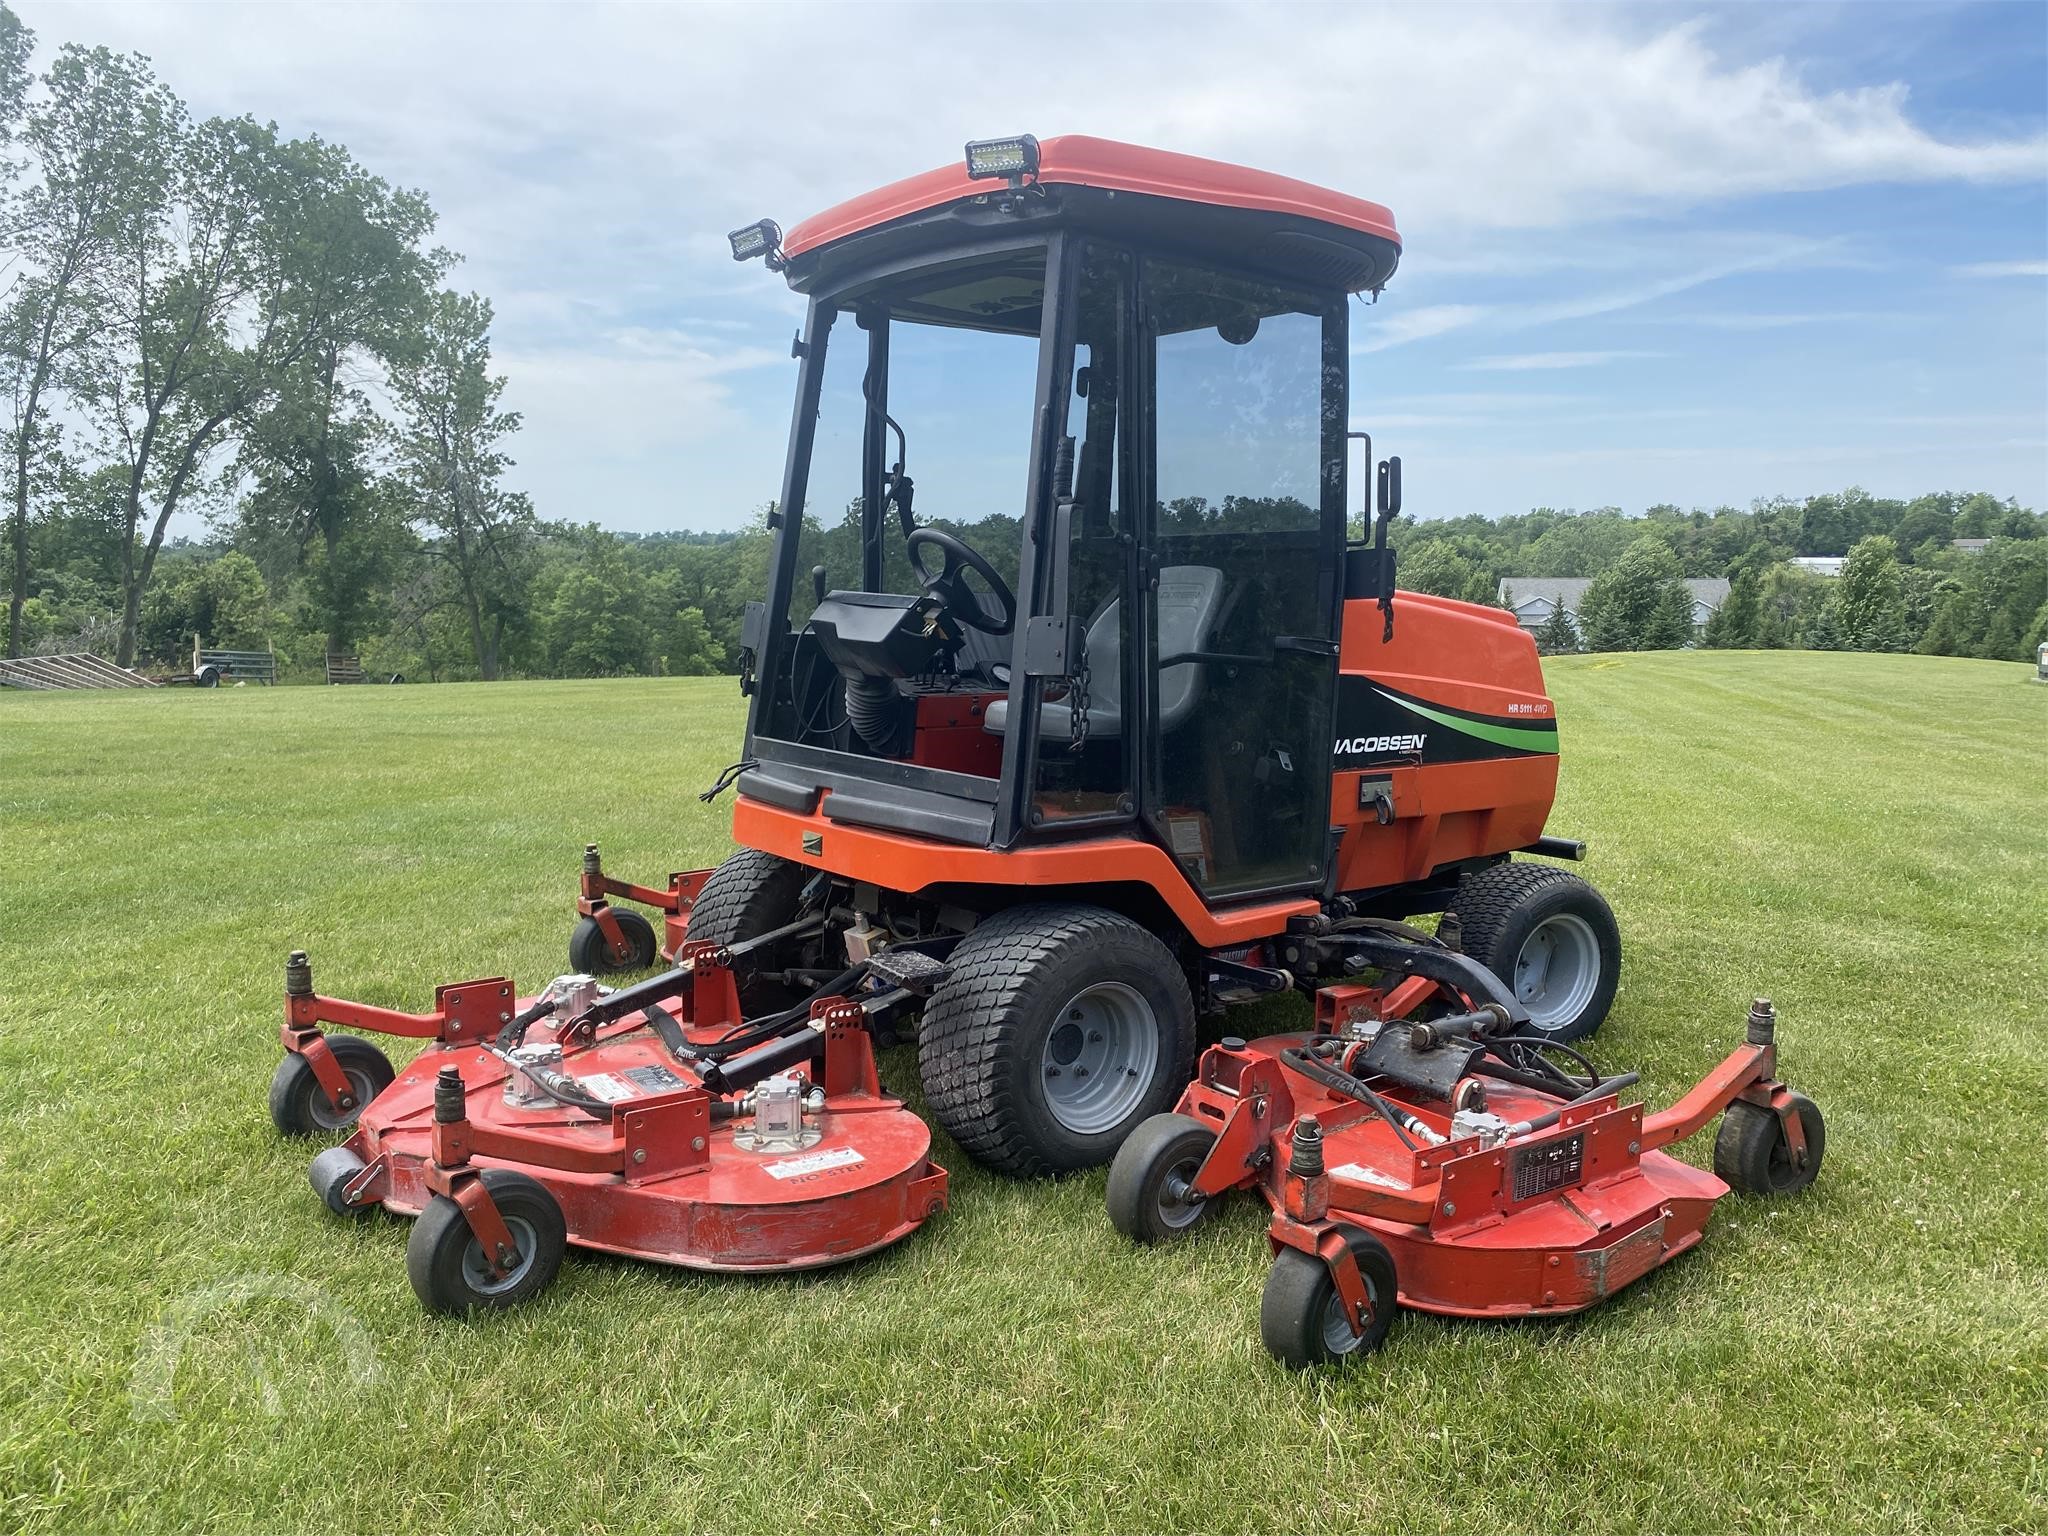 24 Jacobsen Estate lives to mow another day